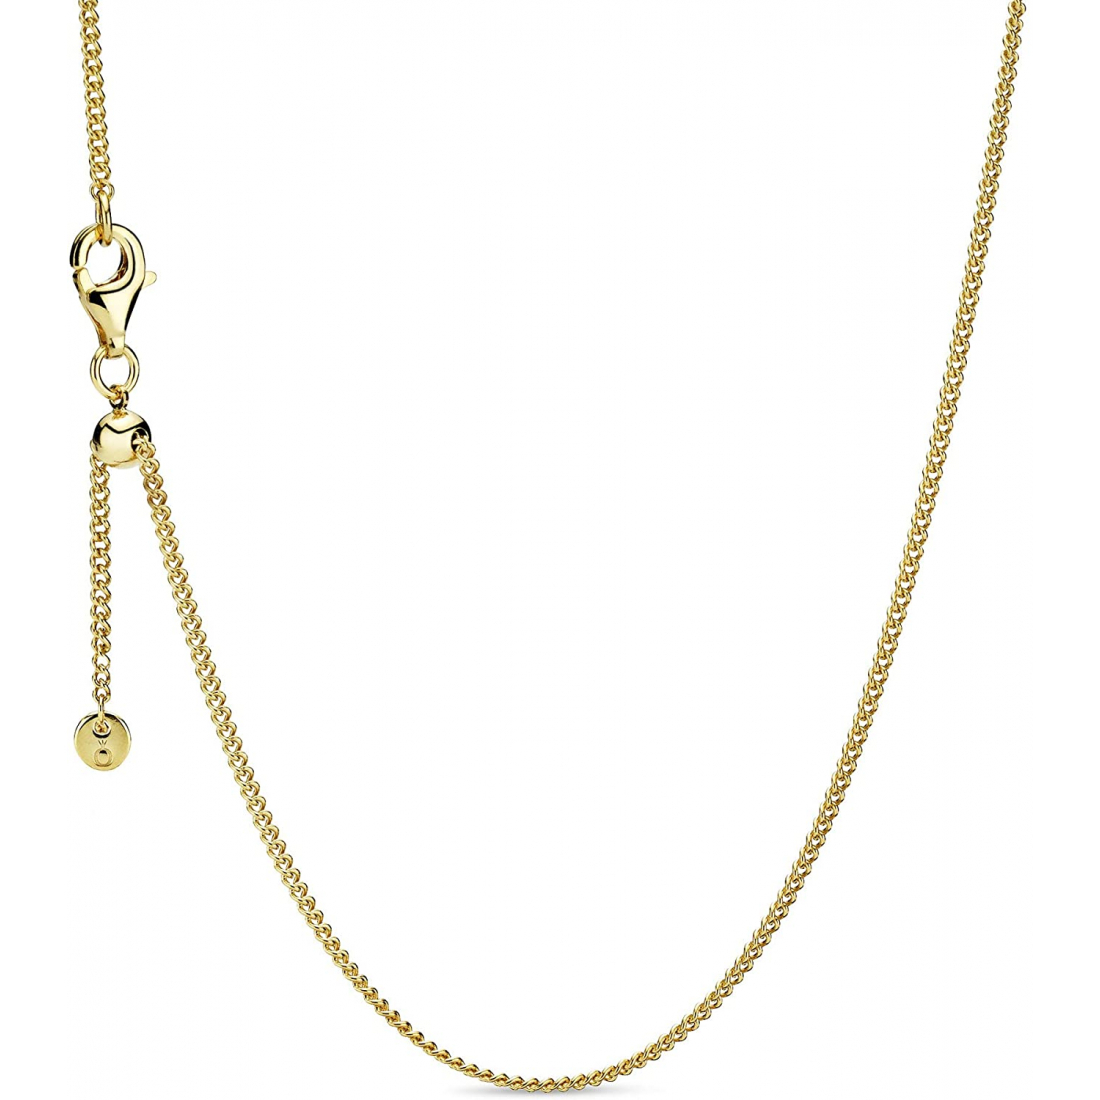 Women's 'Curb' Necklace